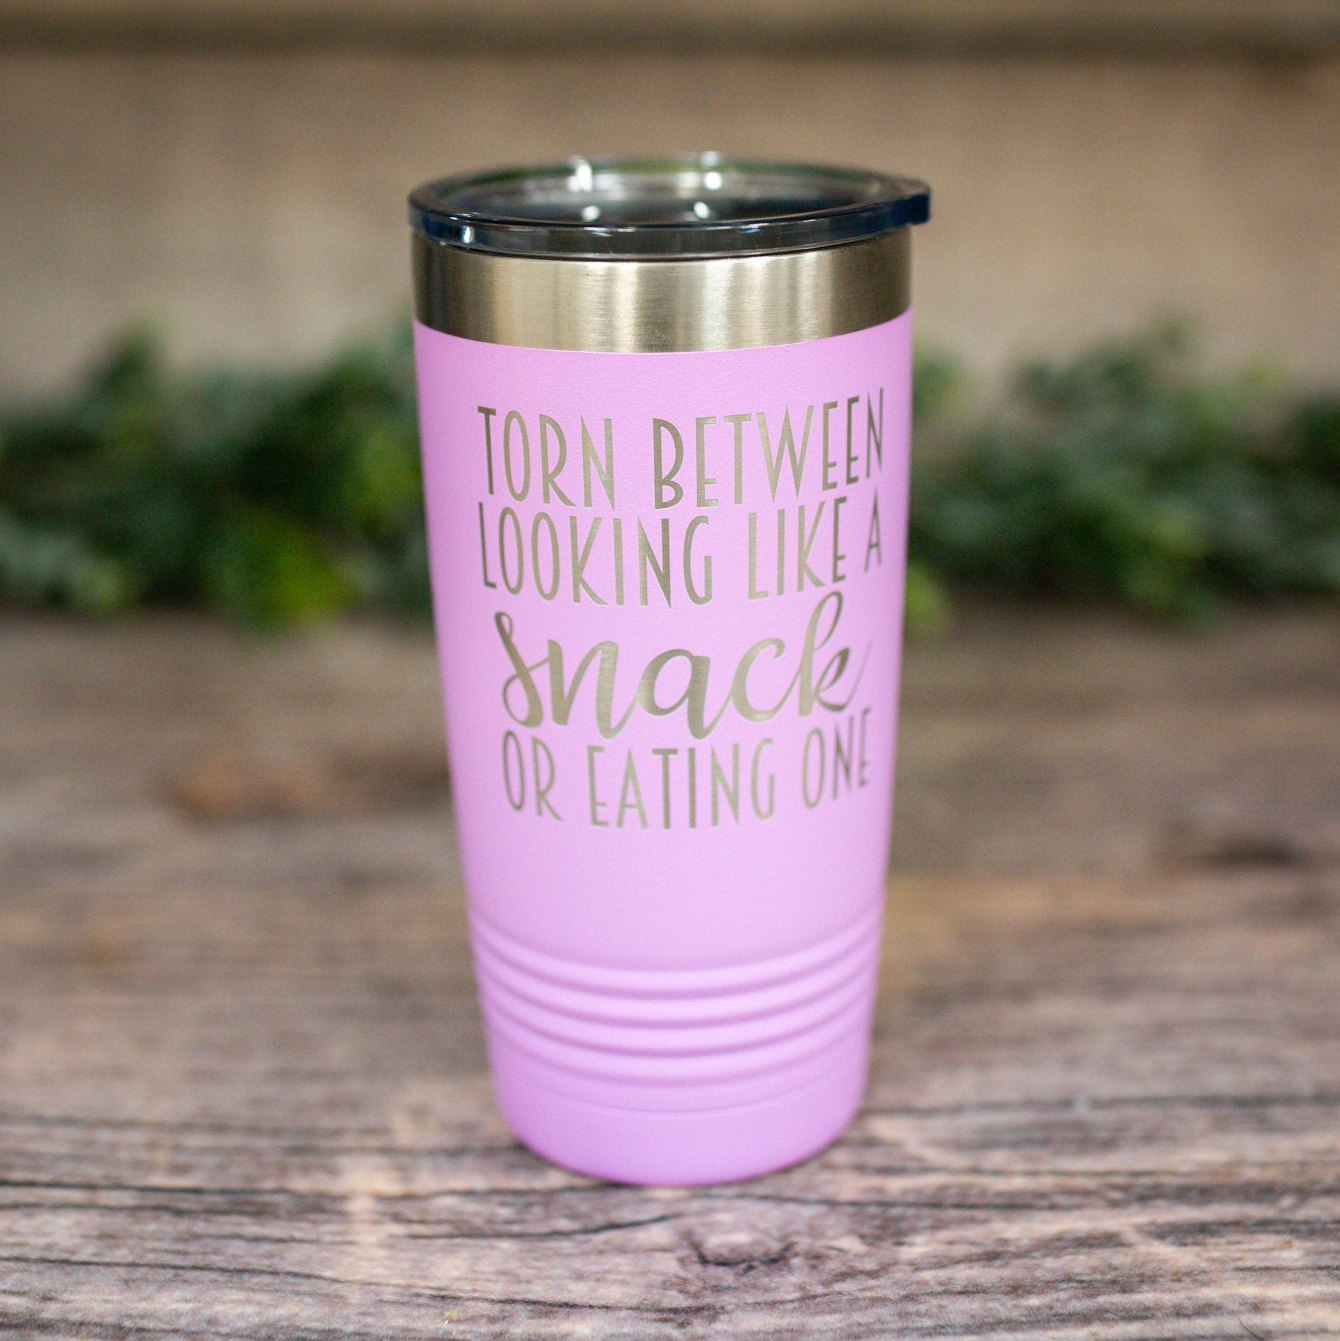 https://3cetching.com/wp-content/uploads/2021/07/torn-between-looking-like-a-snack-or-eating-one-engraved-stainless-steel-tumbler-funny-travel-tumbler-mug-sarcastic-mug-60f73b28.jpg